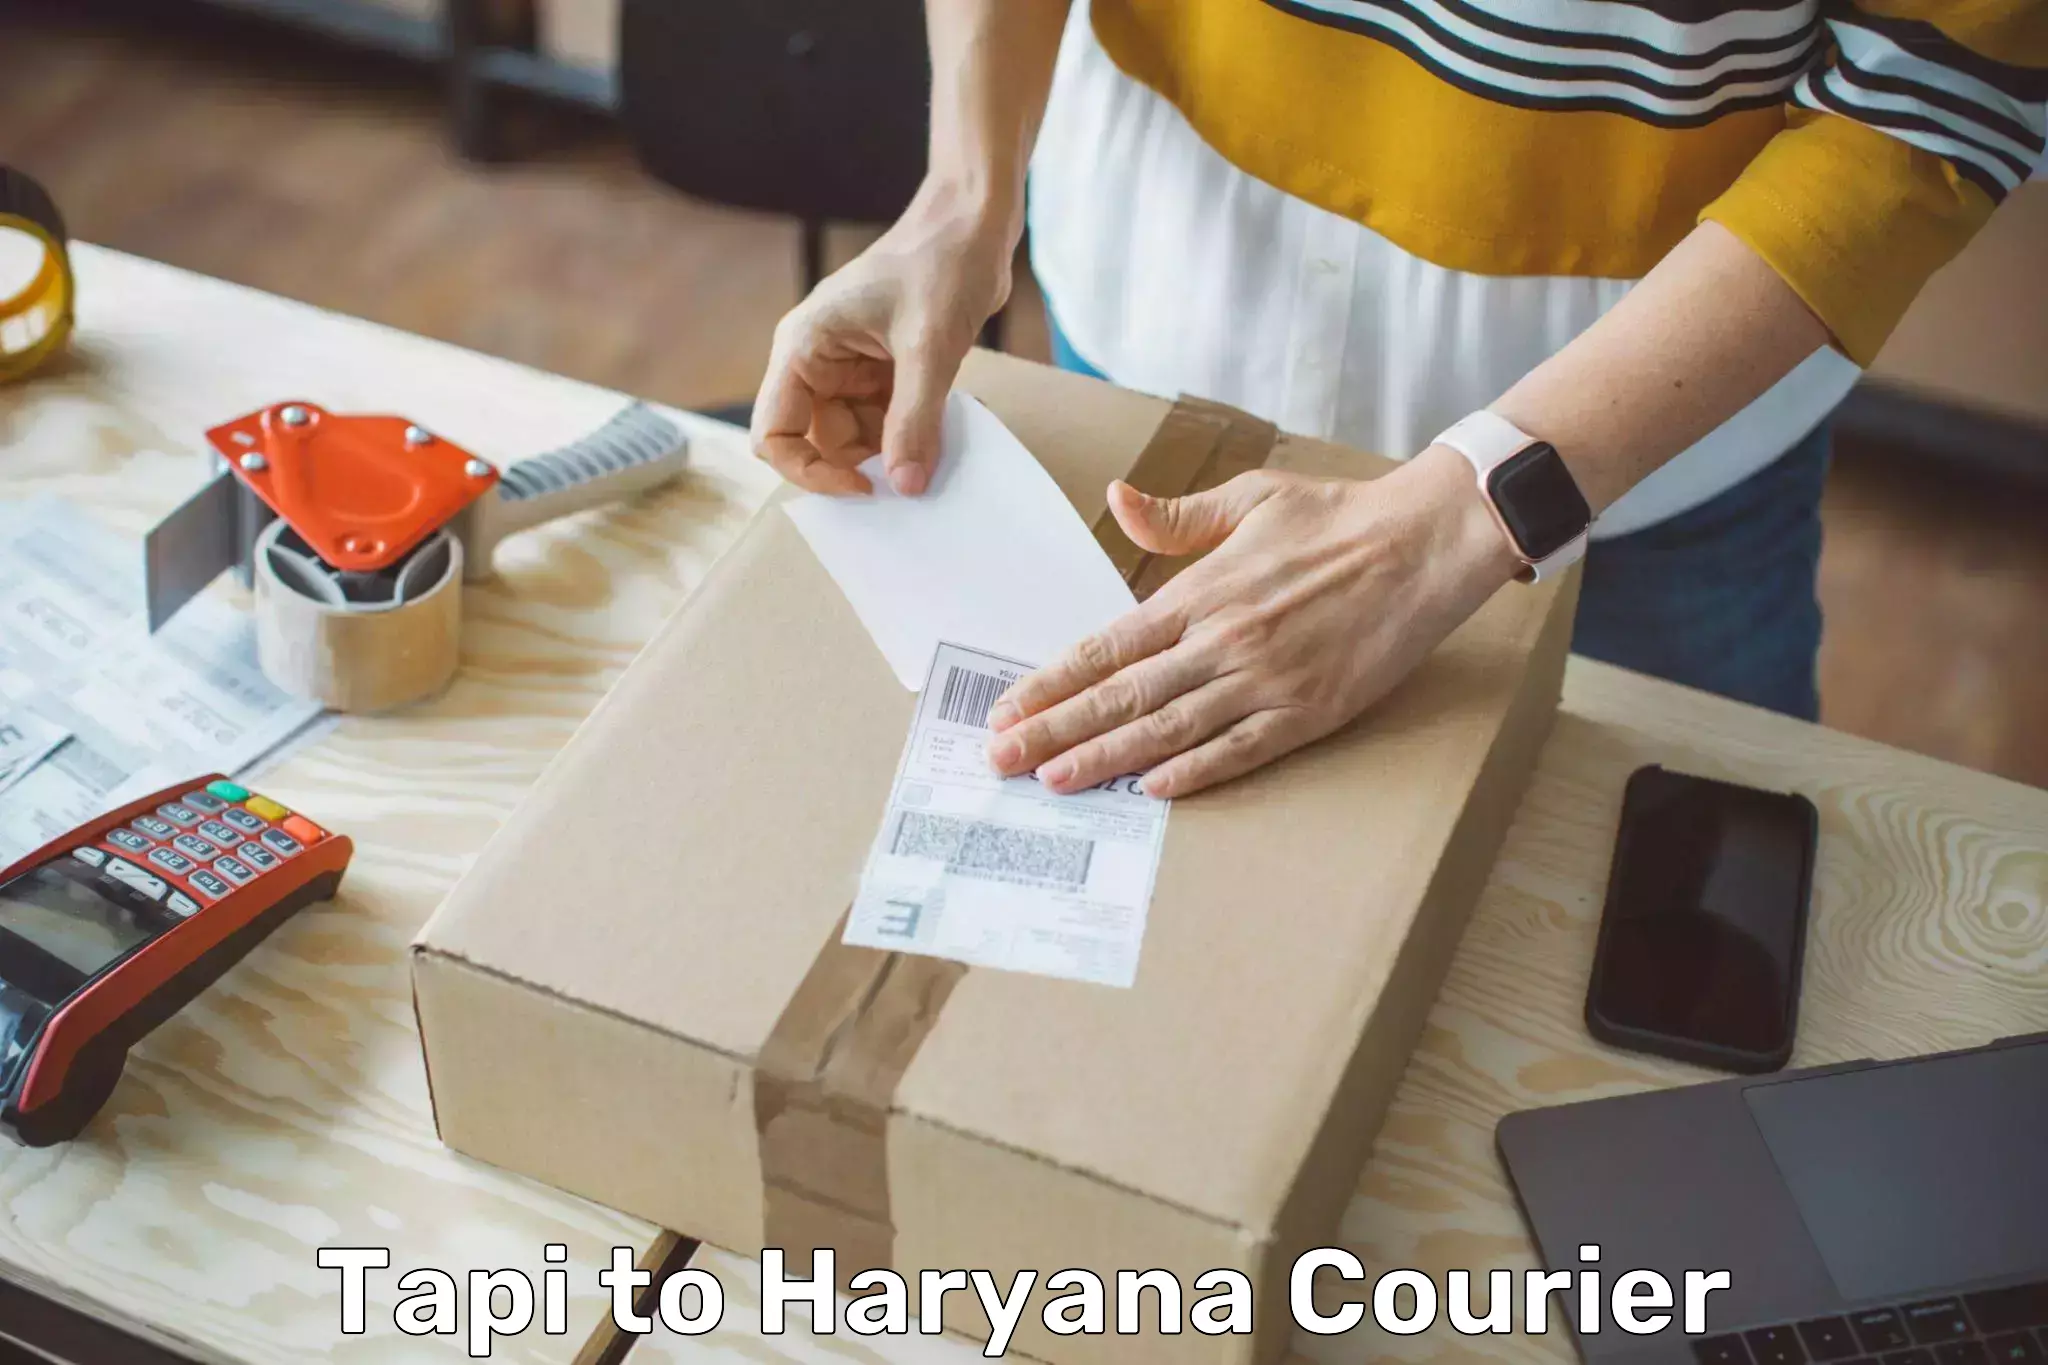 24-hour courier service Tapi to Chaudhary Charan Singh Haryana Agricultural University Hisar